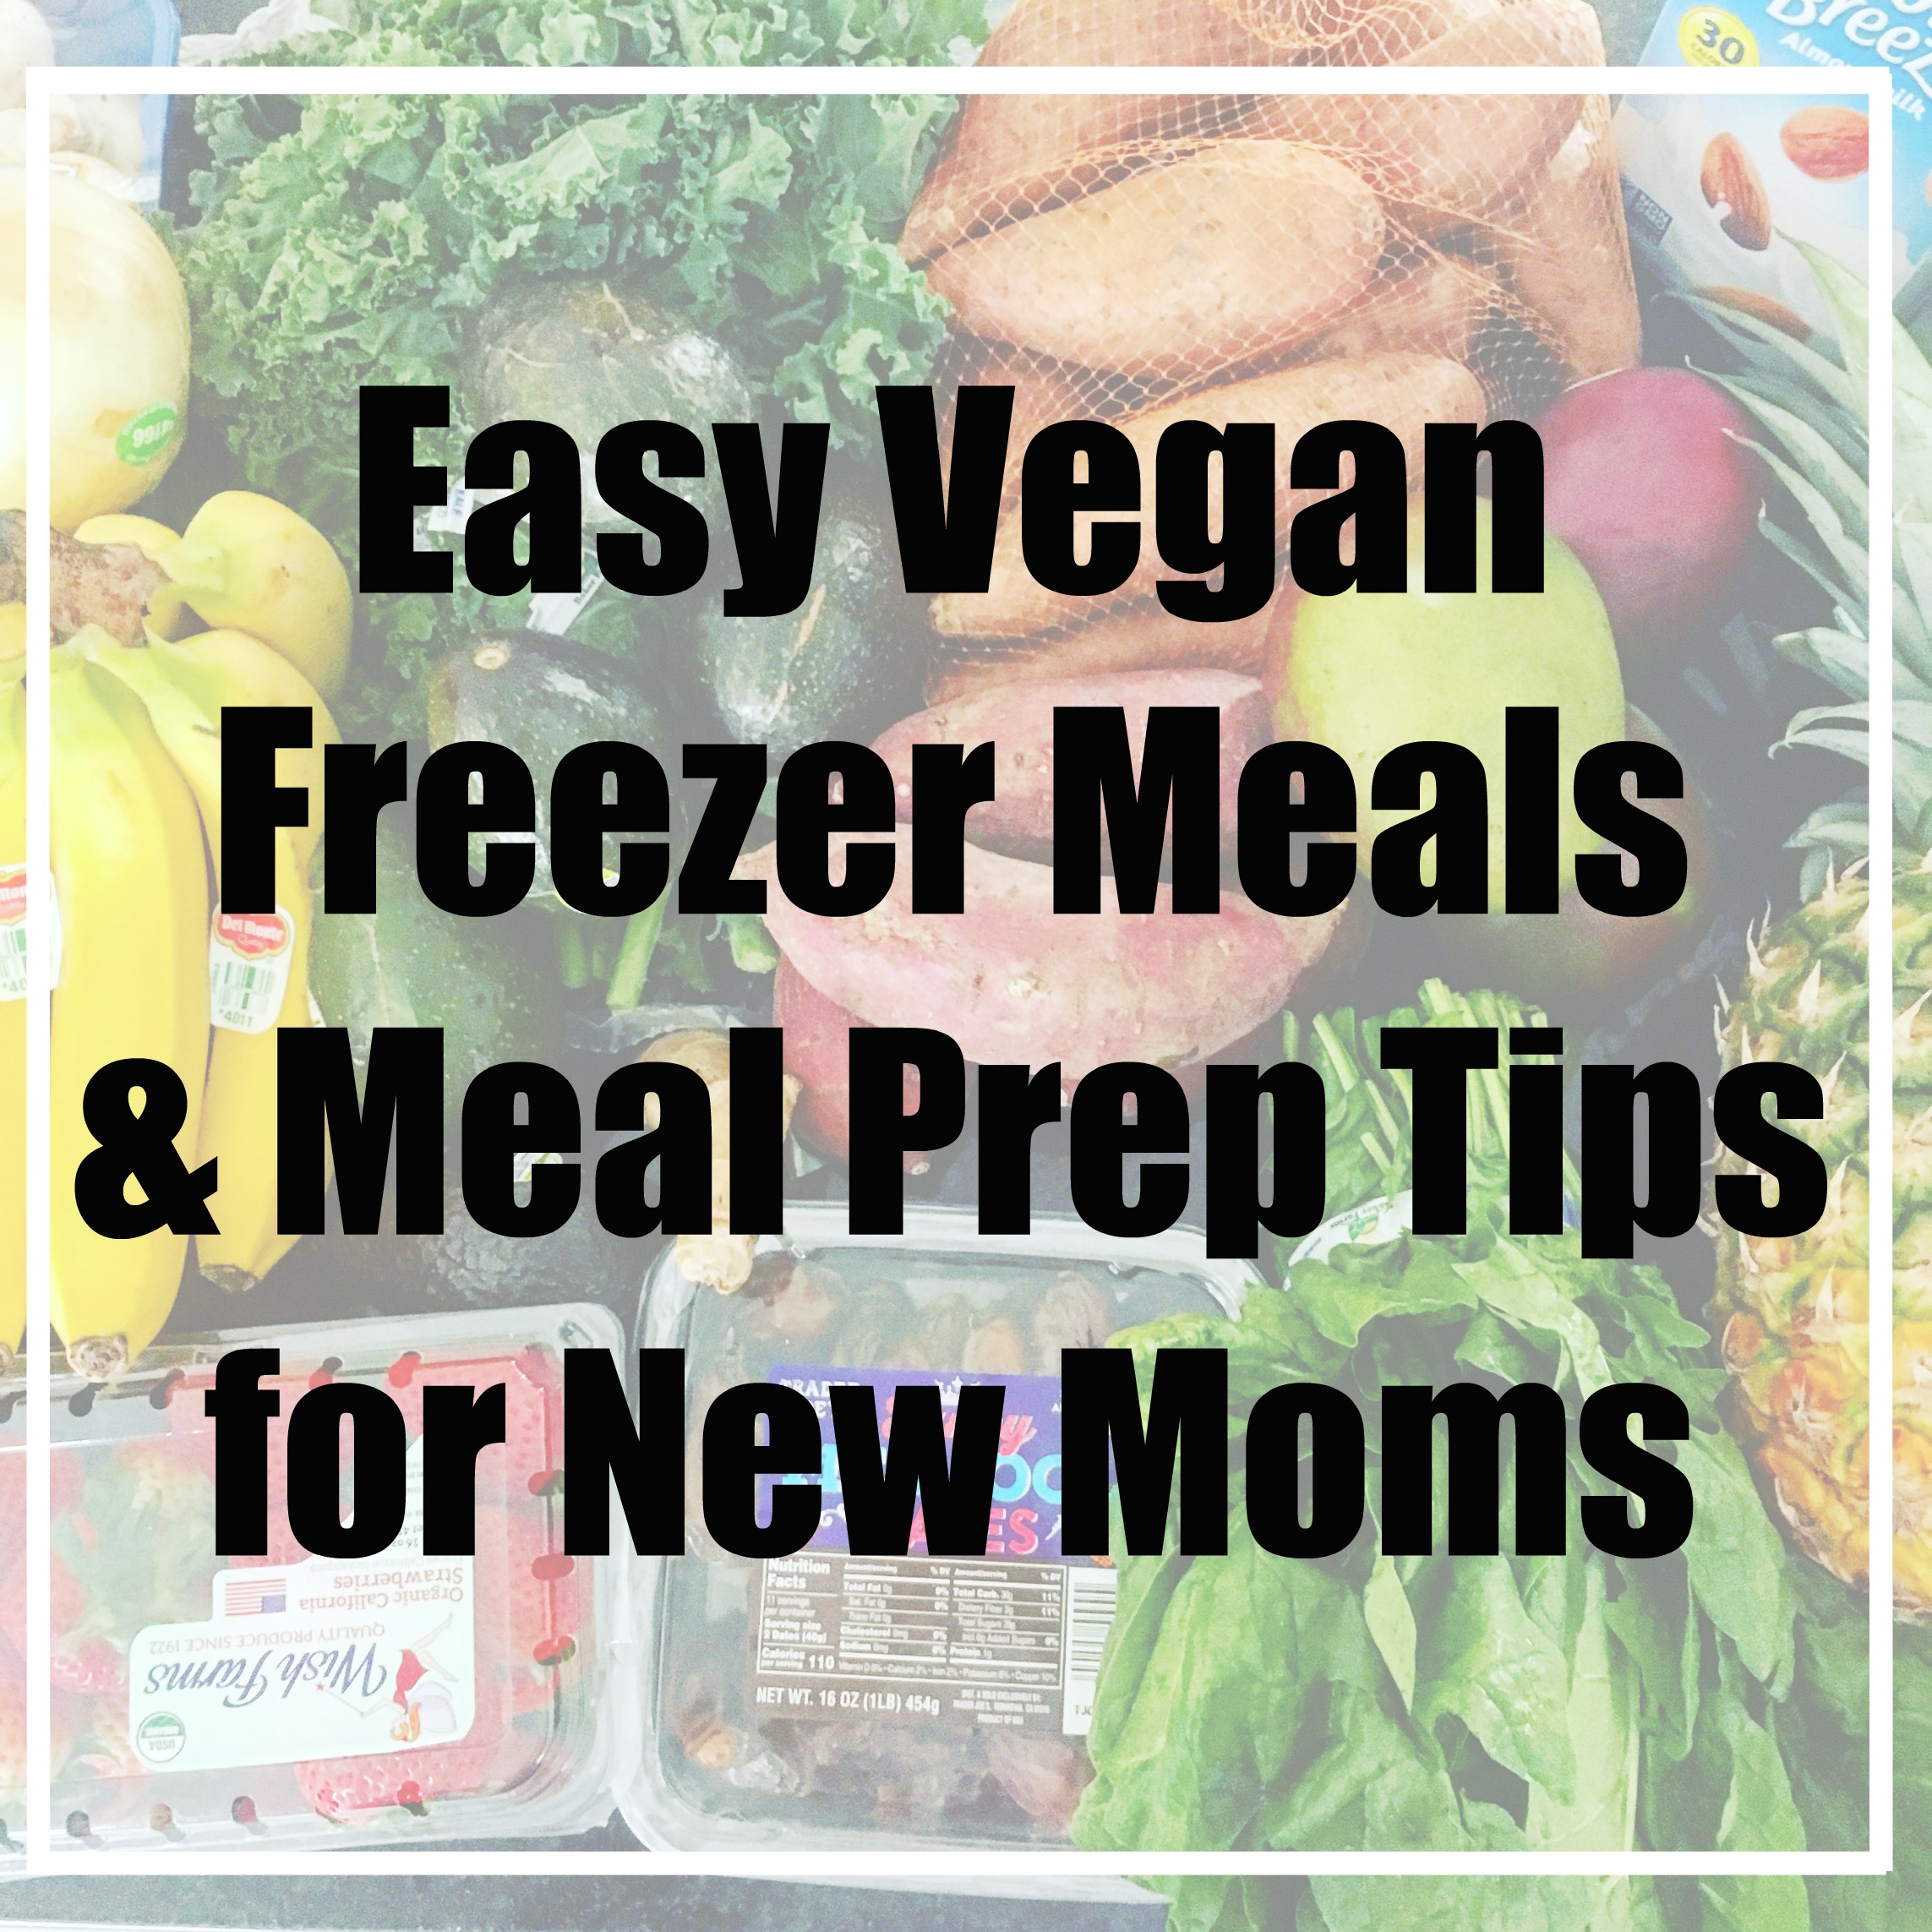 Easy Vegan Freezer Meals and Meal Prep Tips for New Moms